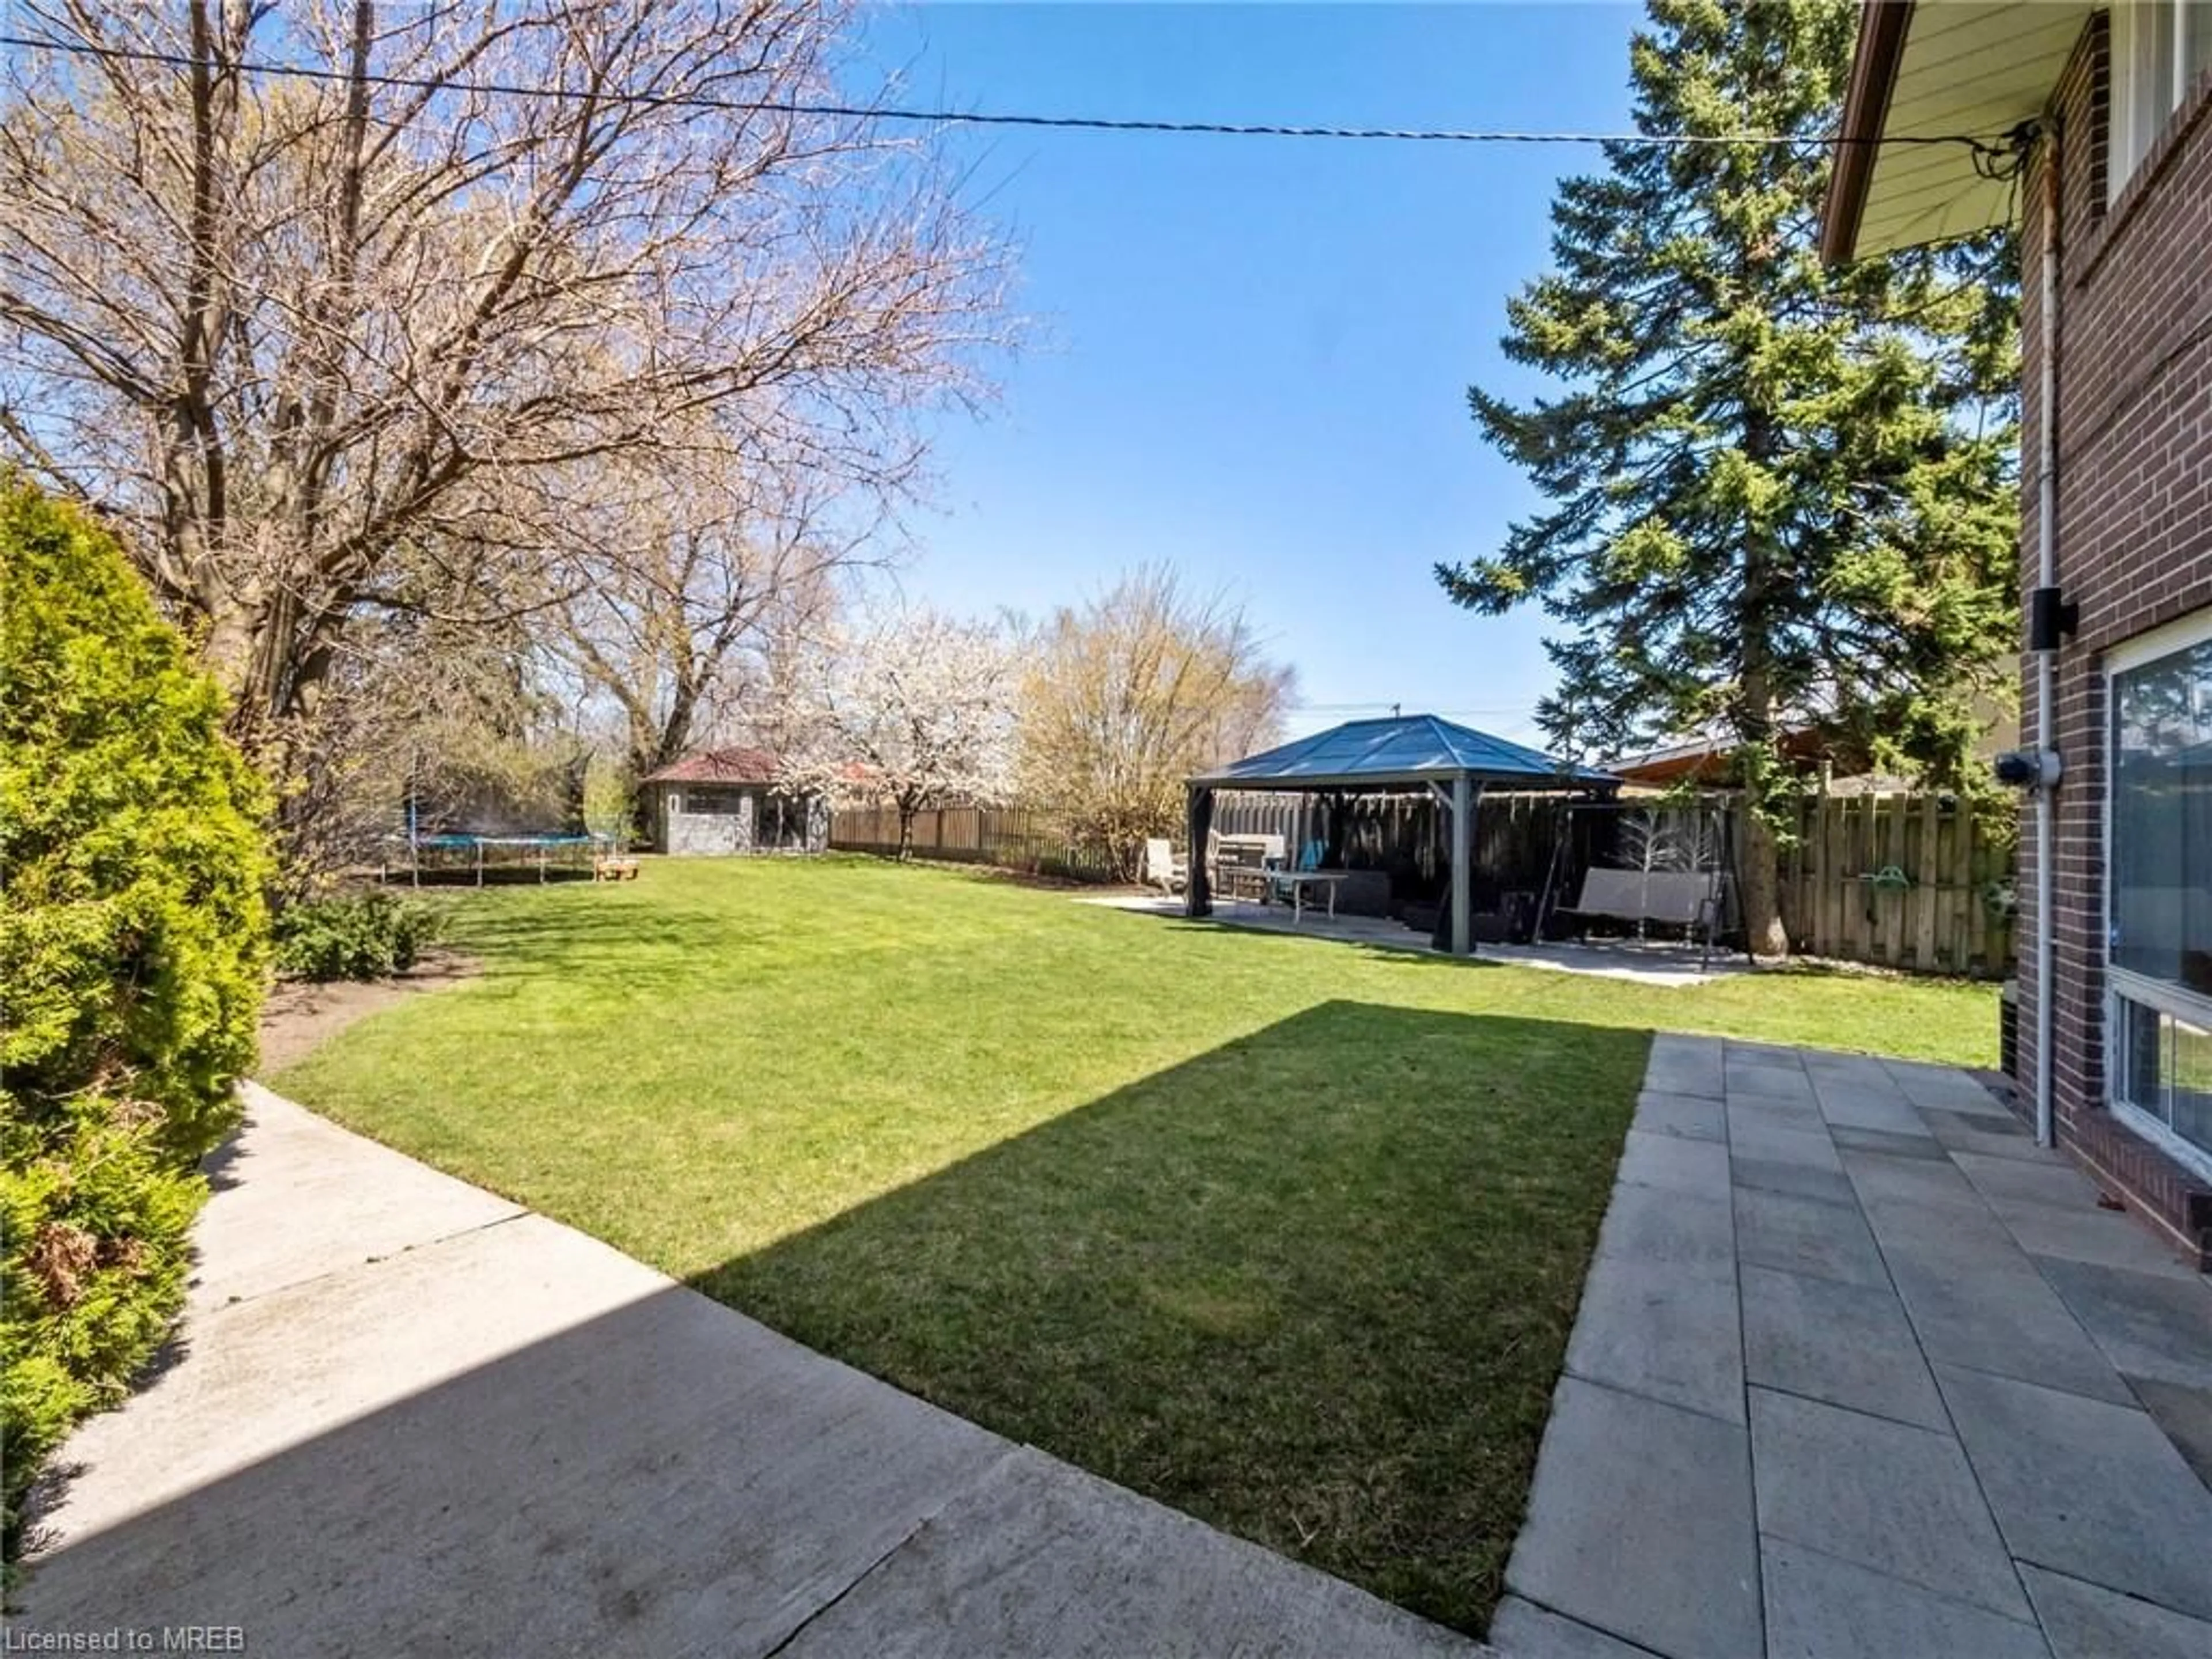 Fenced yard for 38 Dunsany Cres, Toronto Ontario M9R 3W6